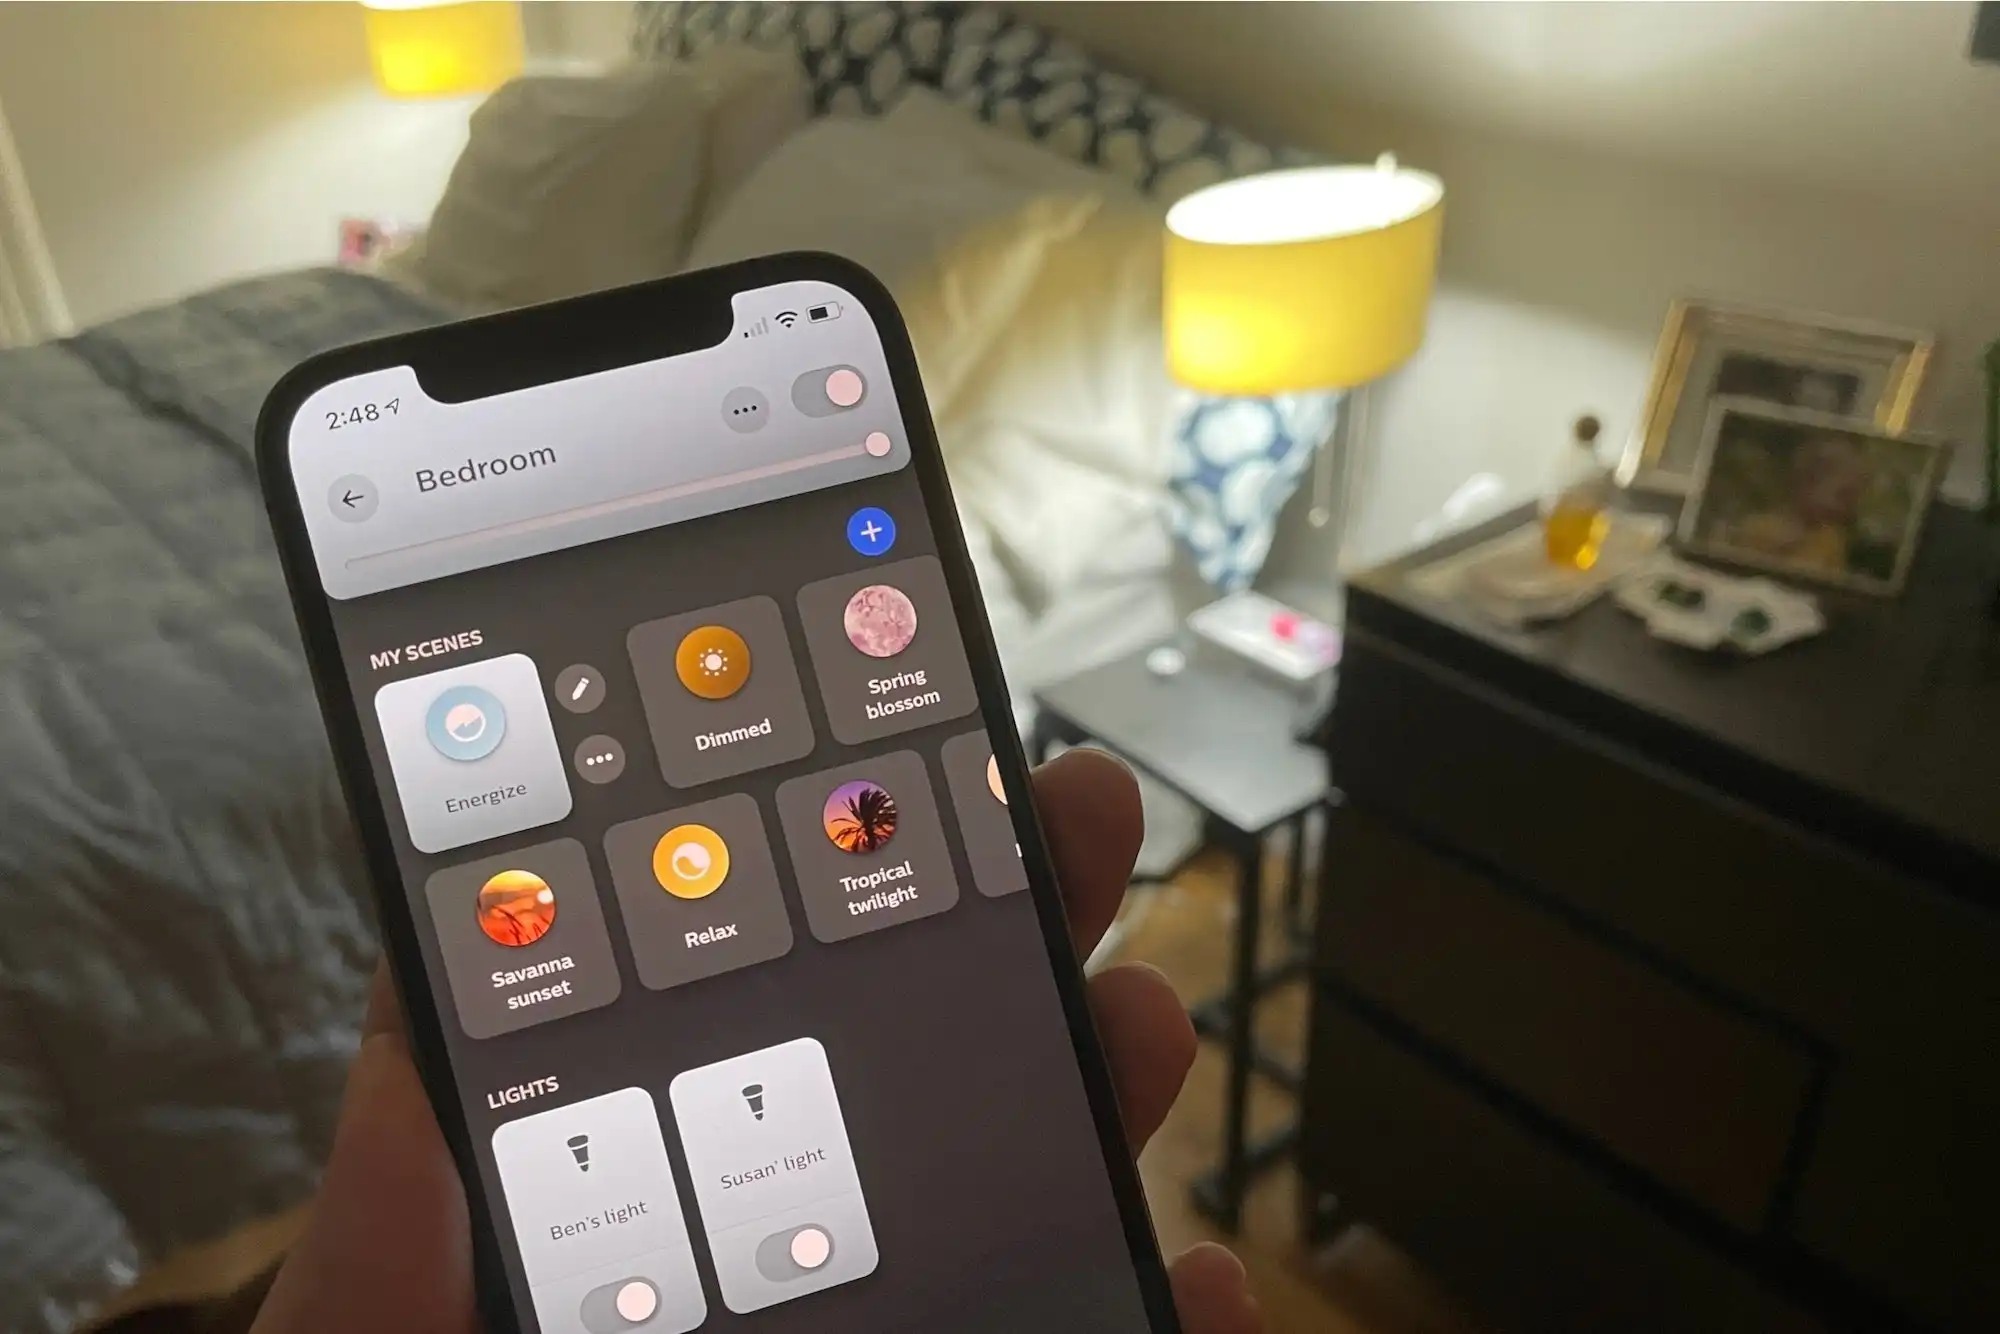 How Can One Set Up A Schedule To Turn A Lamp On And Then Off With Philips Hue